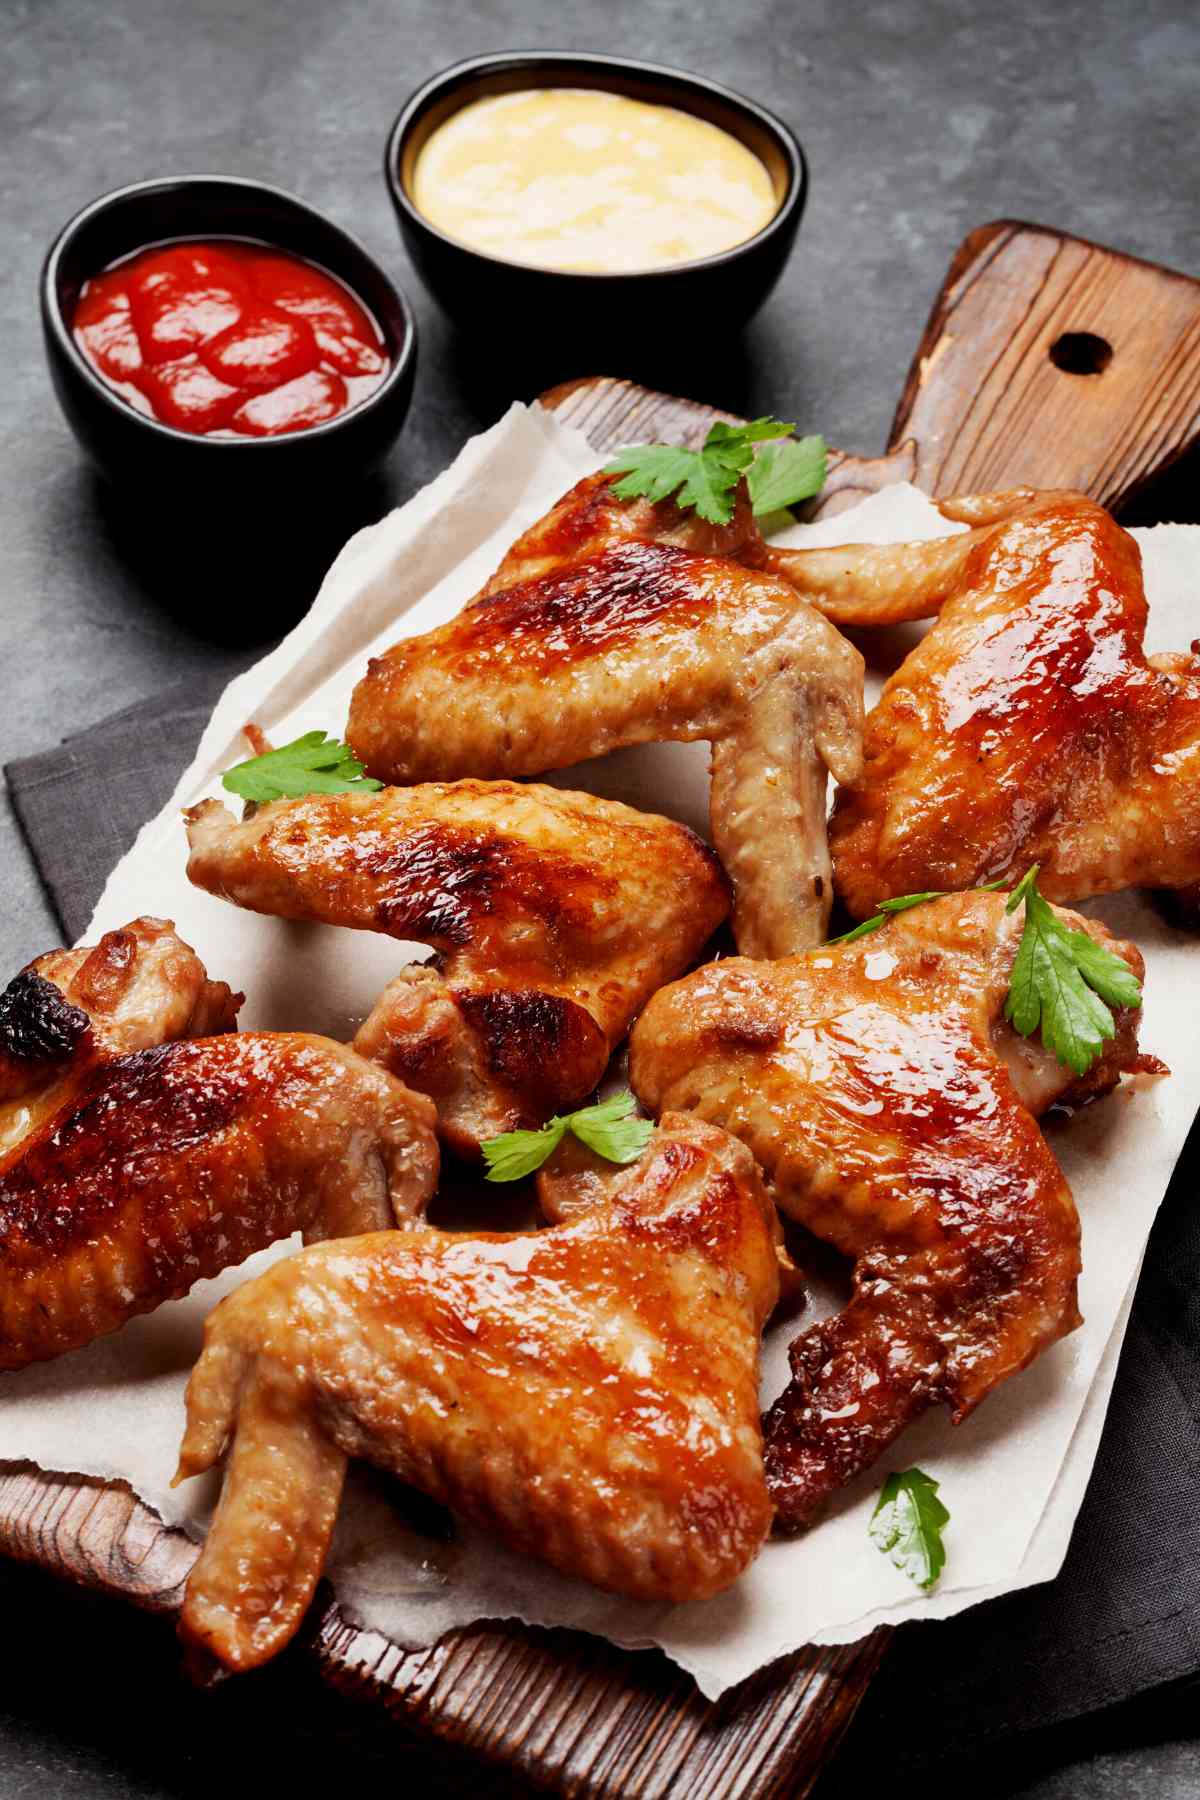 How do you get chicken wings to be as juicy and mouth-watering as possible? It all comes down to the best Chicken Wing's Internal Temperature.